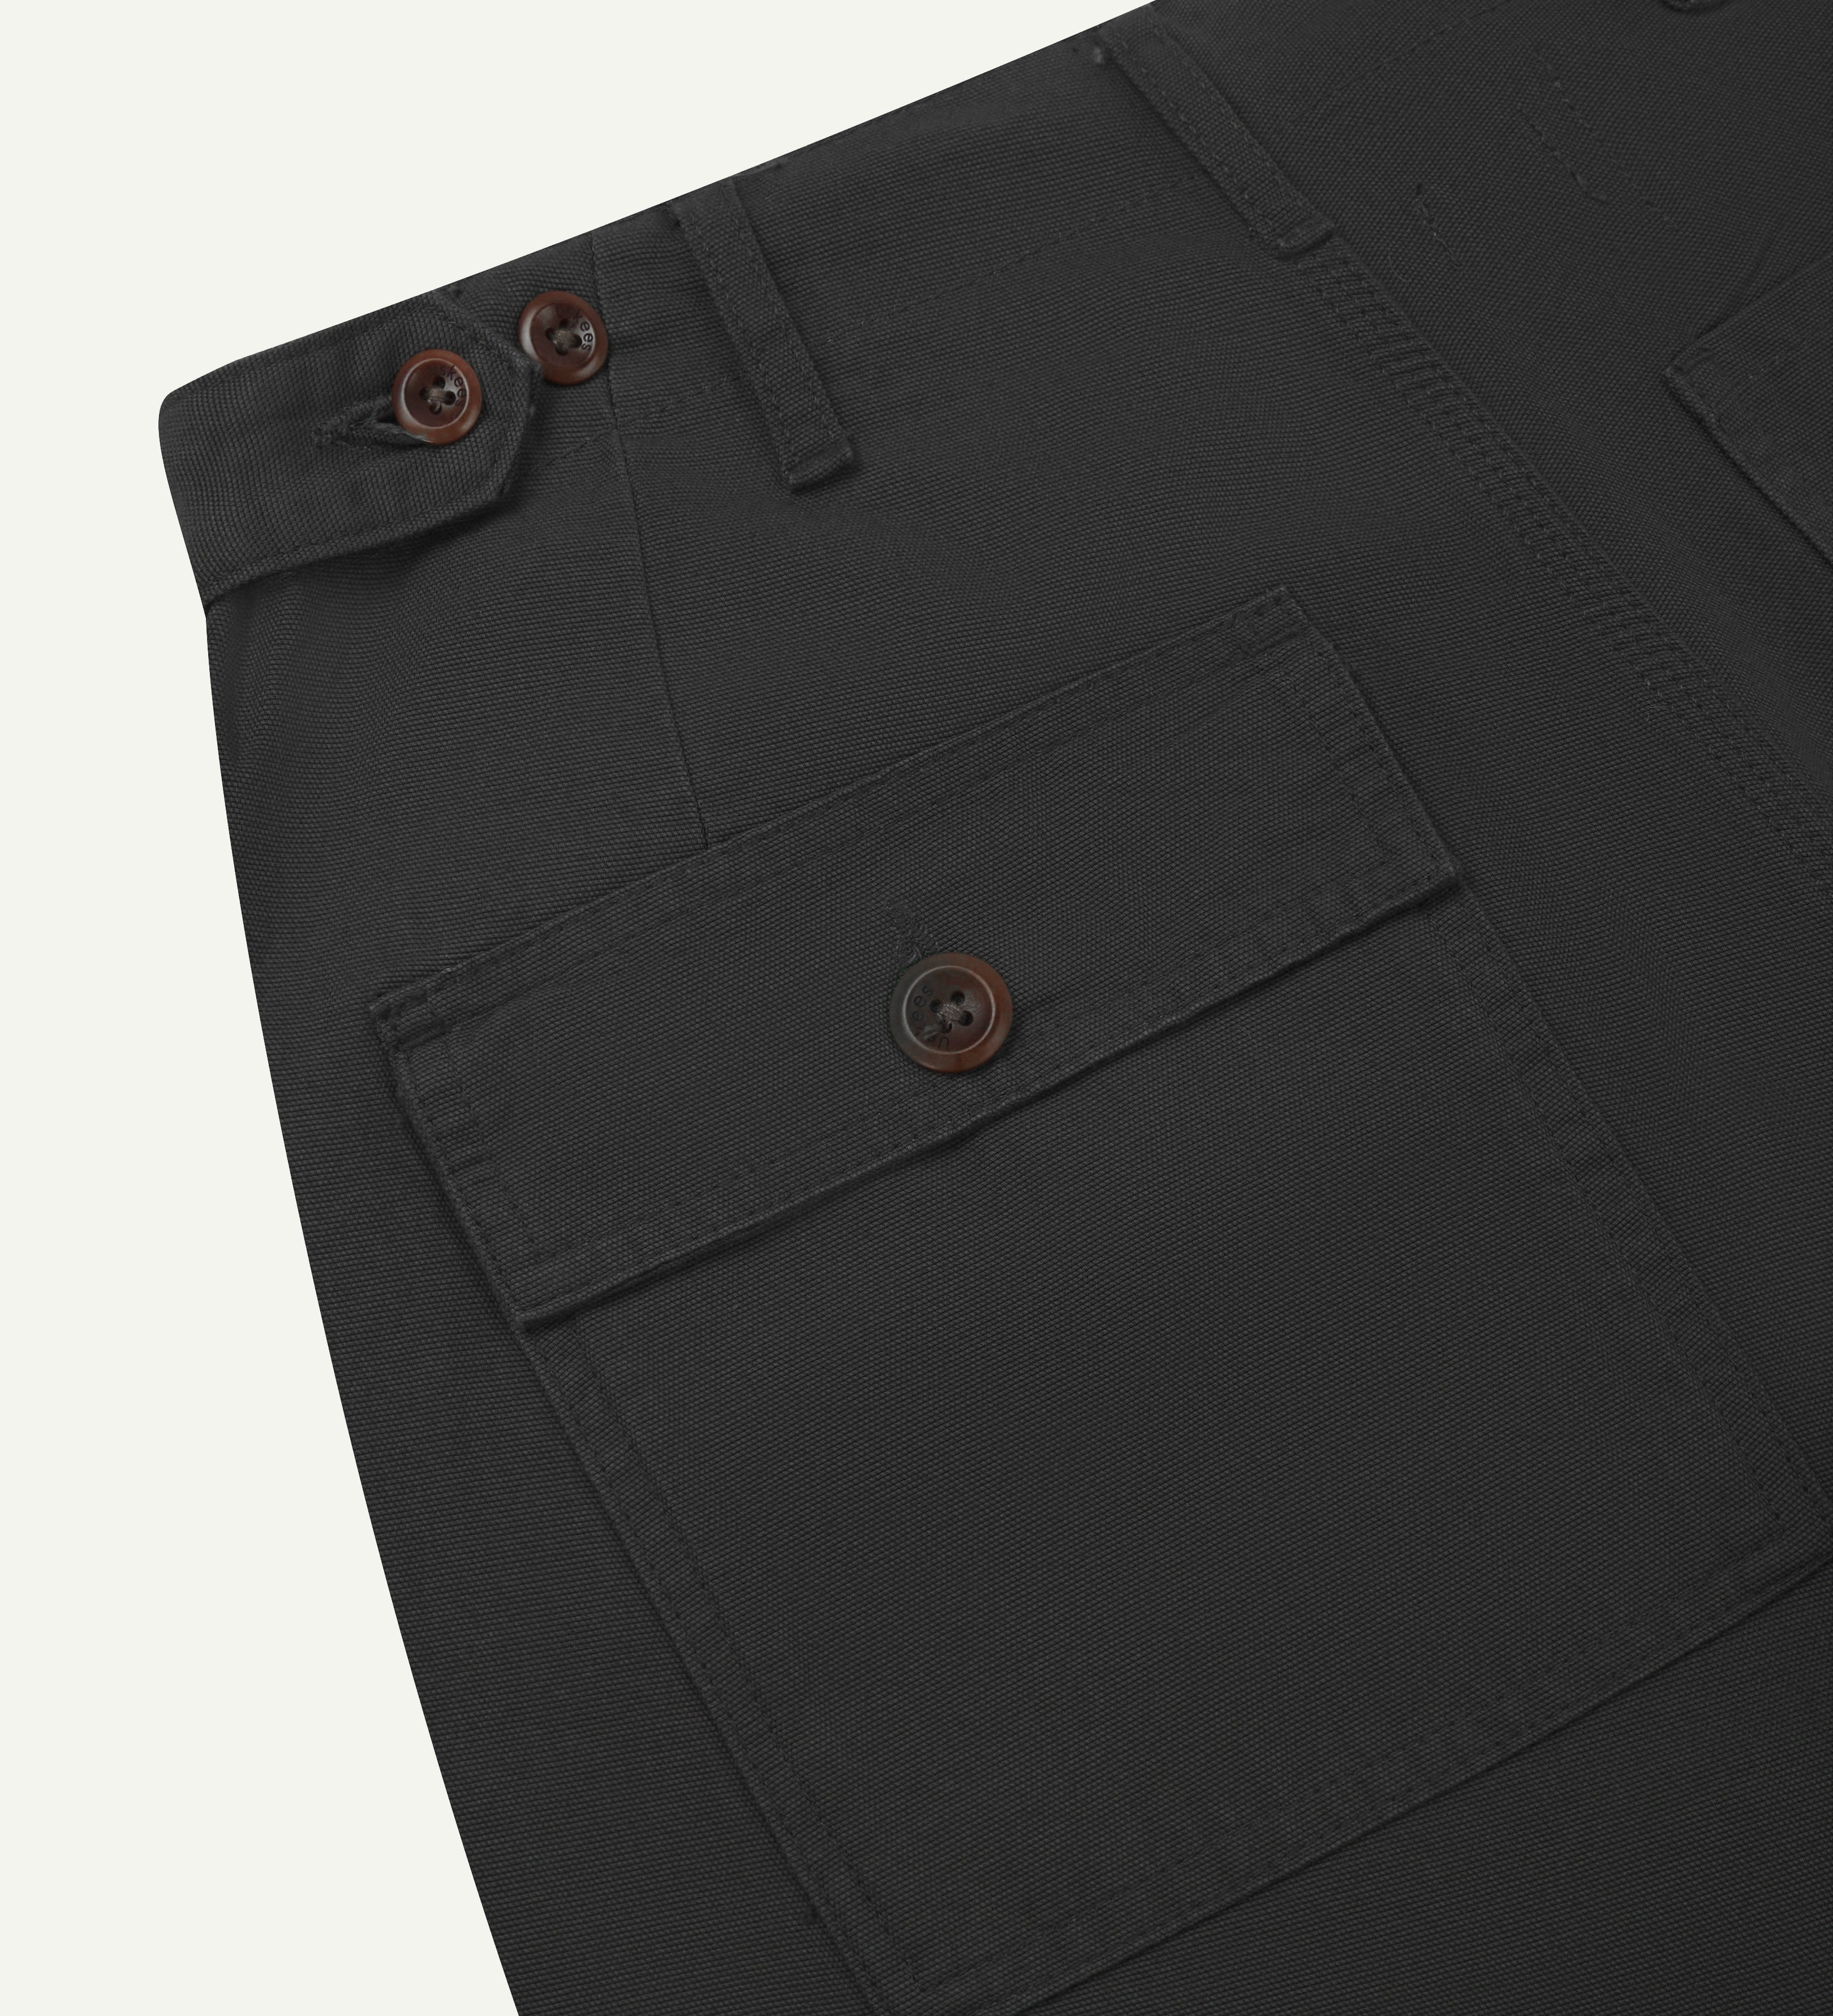 Back flat shot of uskees #5005 men's trousers in dark grey showing close-up view of back pocket, belt loops and waist adjusting buttons